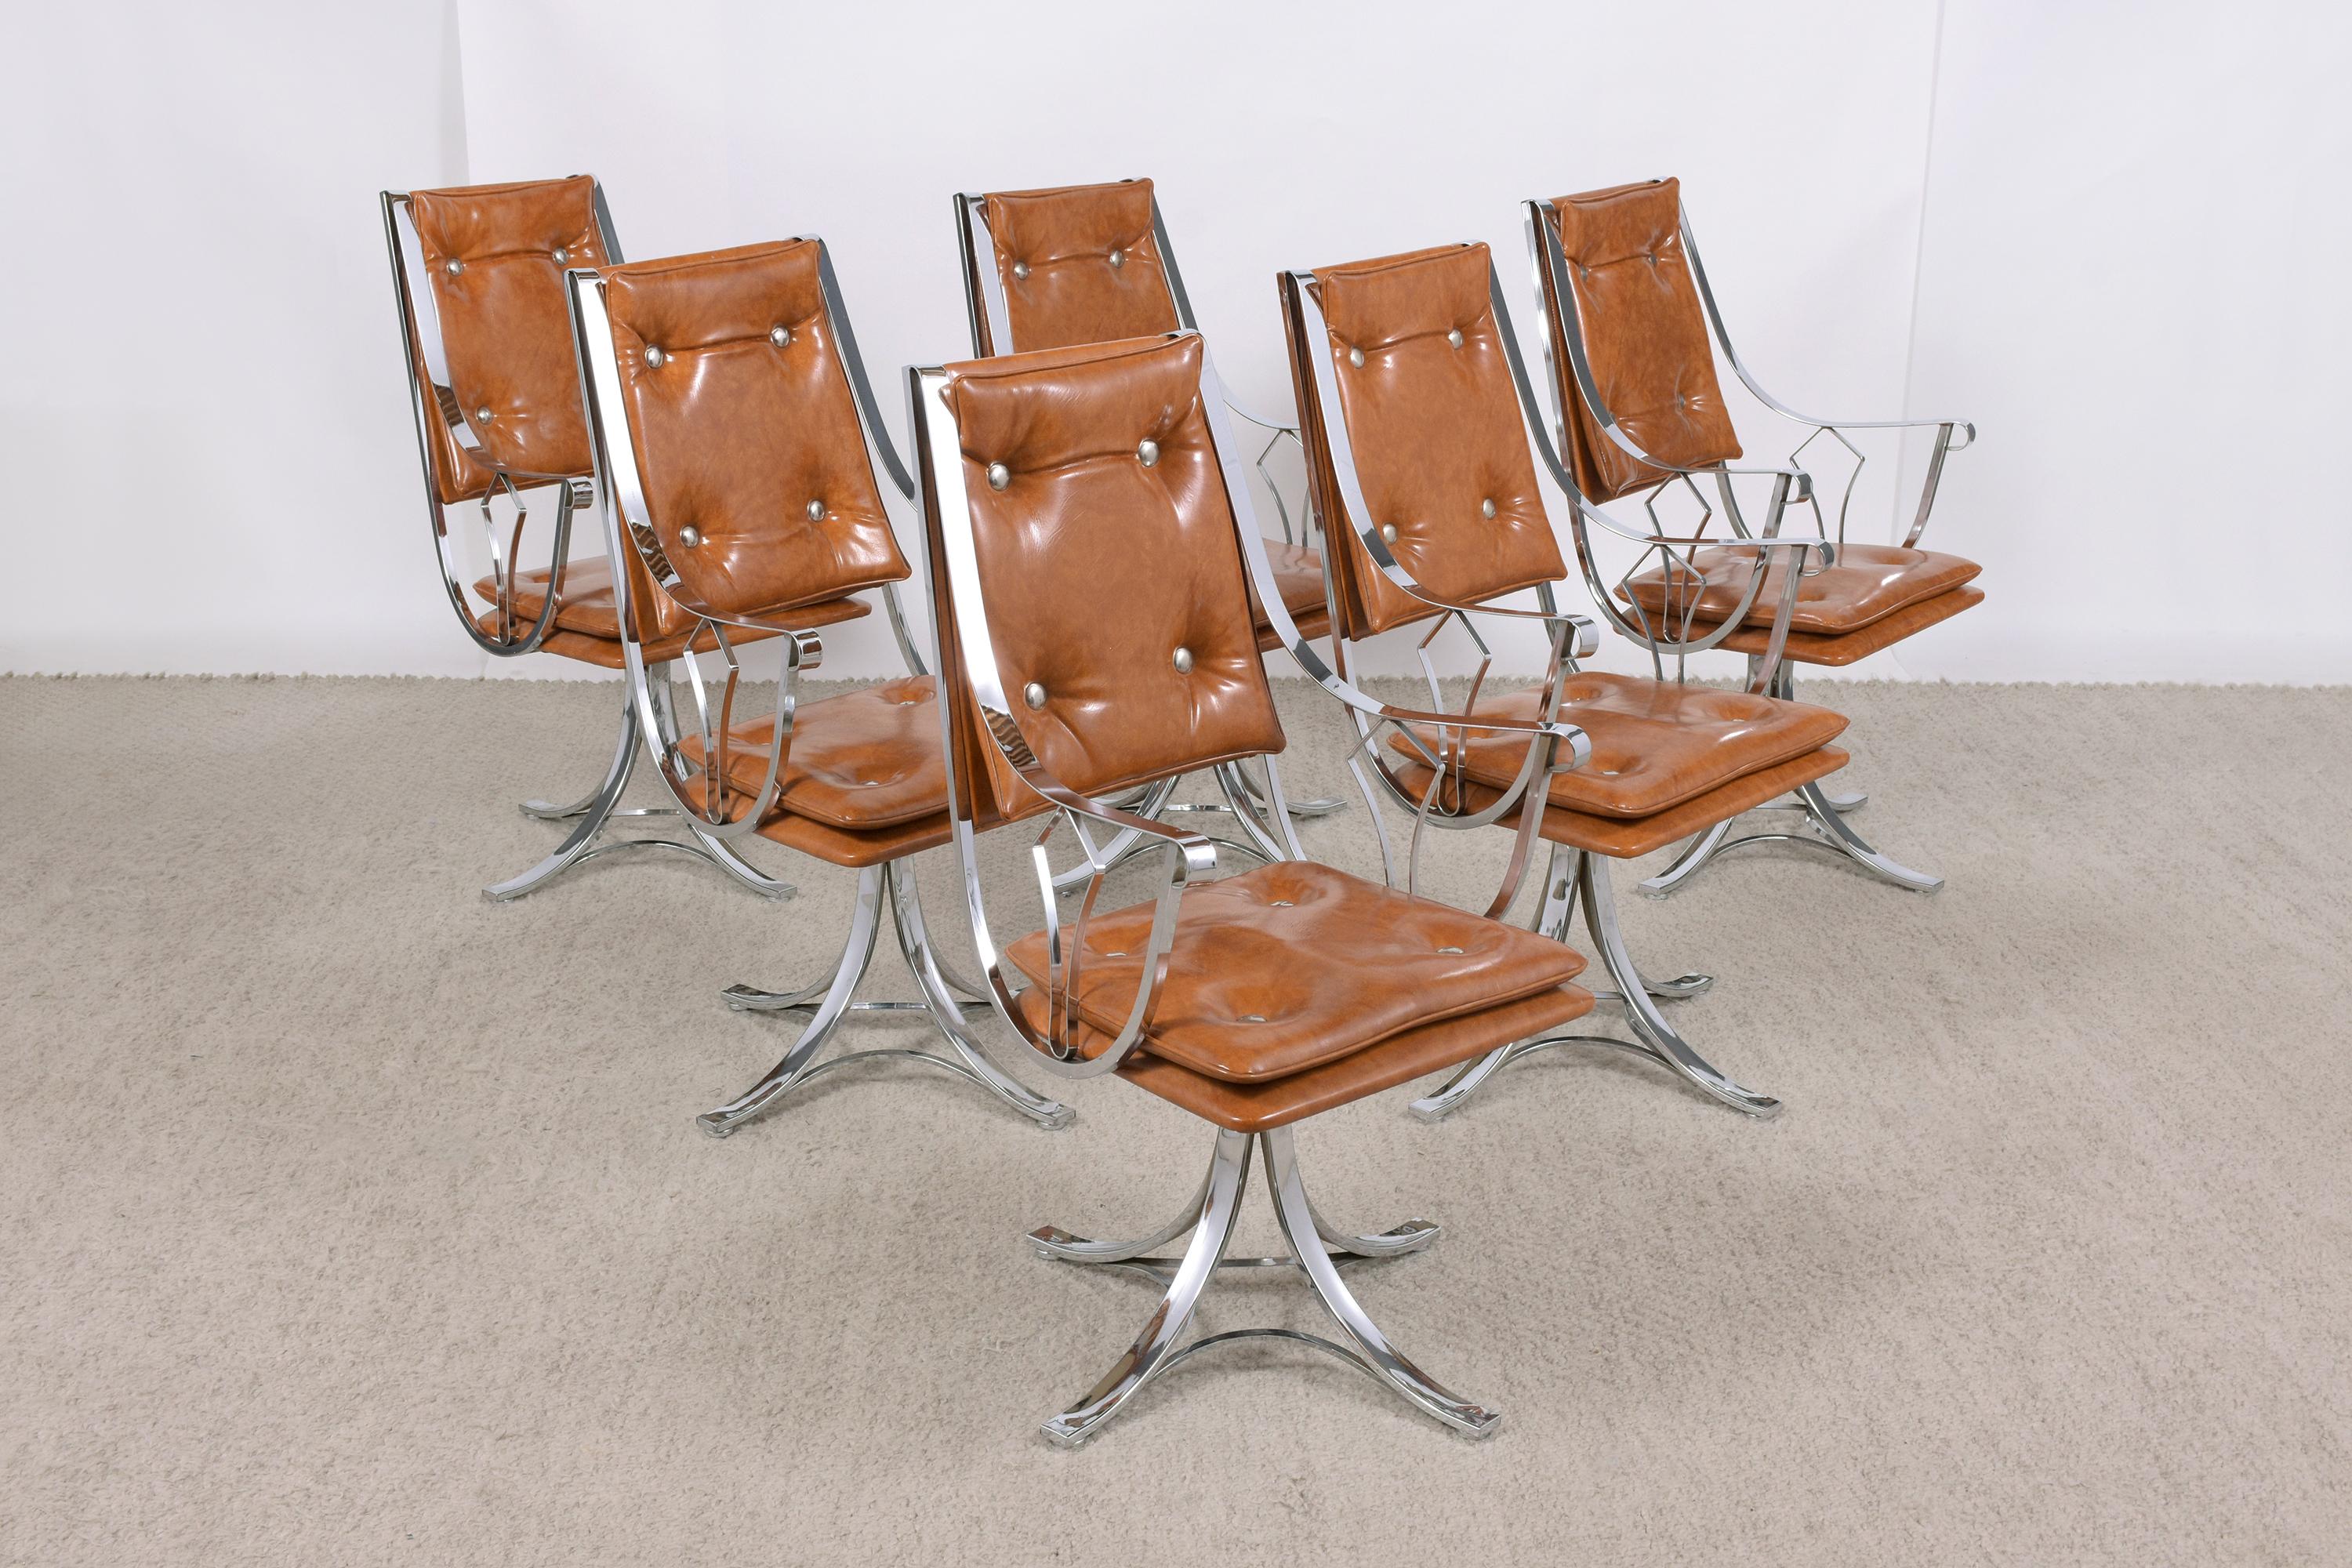 An extraordinary set of vintage dining chairs in great condition this set is a beautifully crafted frame out of steel with a chrome finish. This fabulous set of six chairs features a high backrest, and scrolled armrest, the back, and seat are